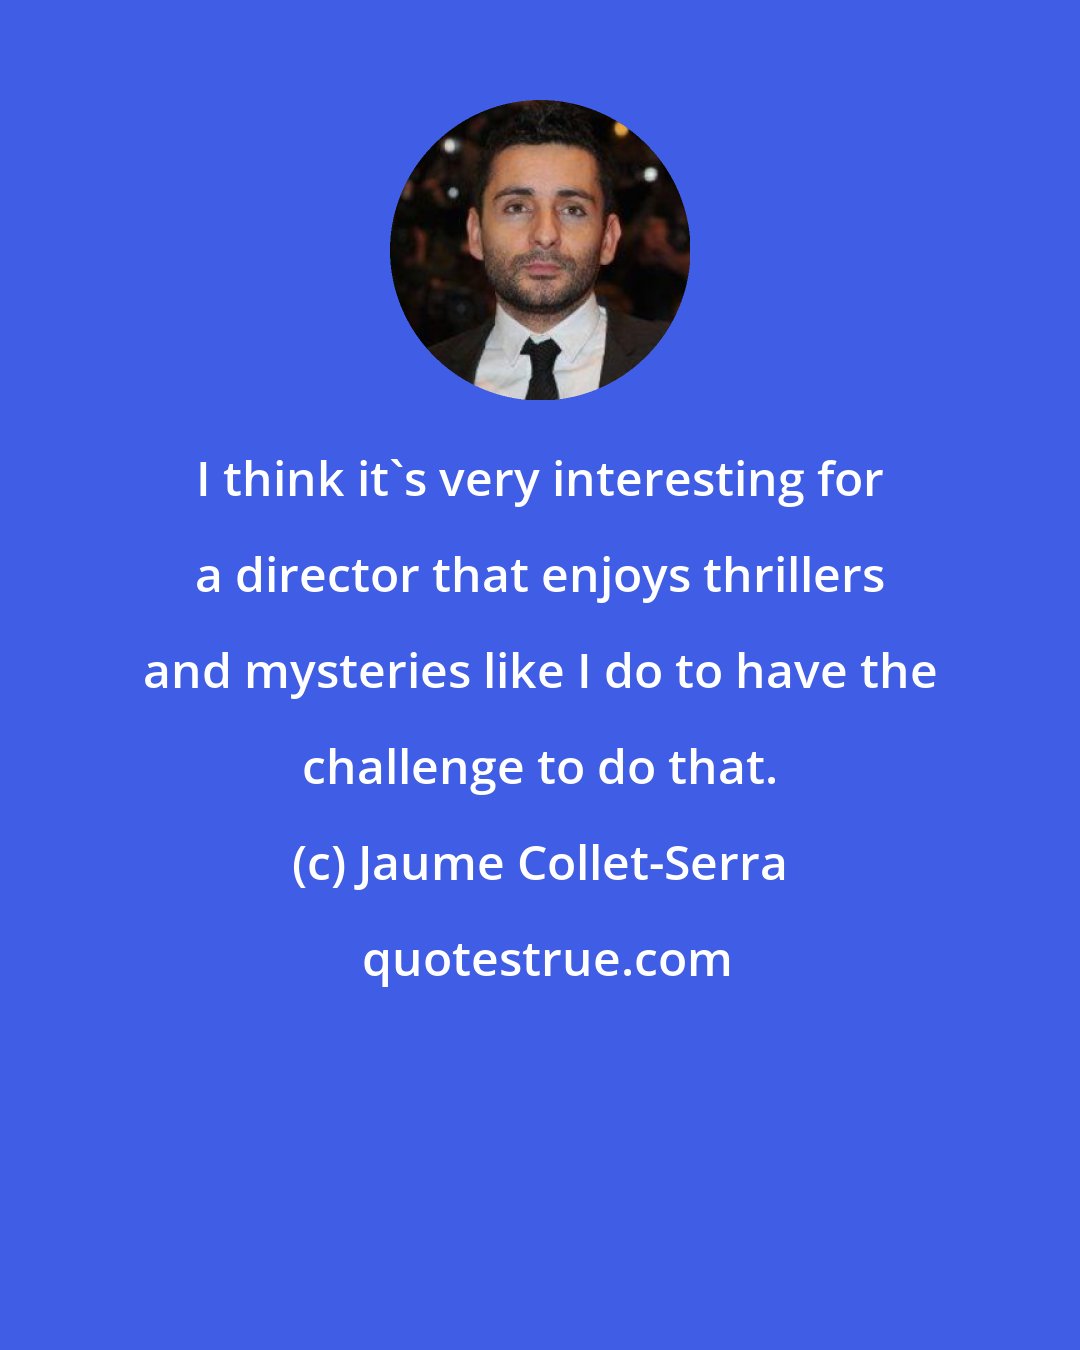 Jaume Collet-Serra: I think it's very interesting for a director that enjoys thrillers and mysteries like I do to have the challenge to do that.